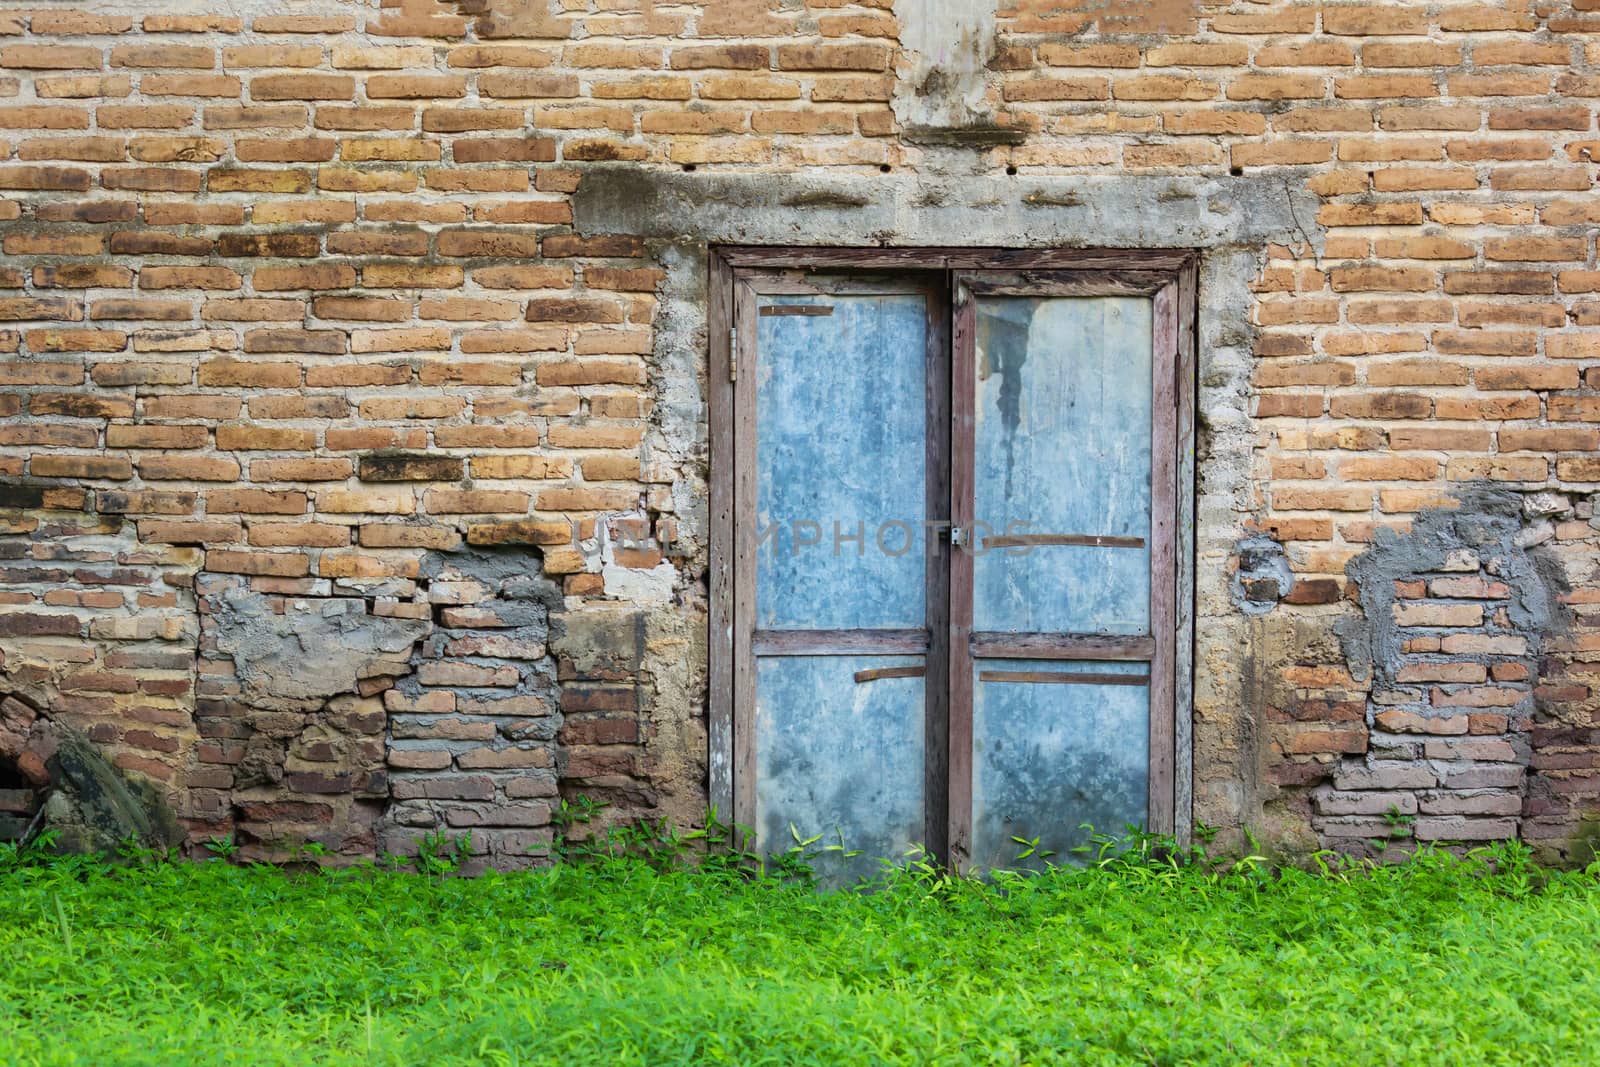 Old Vintage Door On The Old Brick Wall And Green Grass.